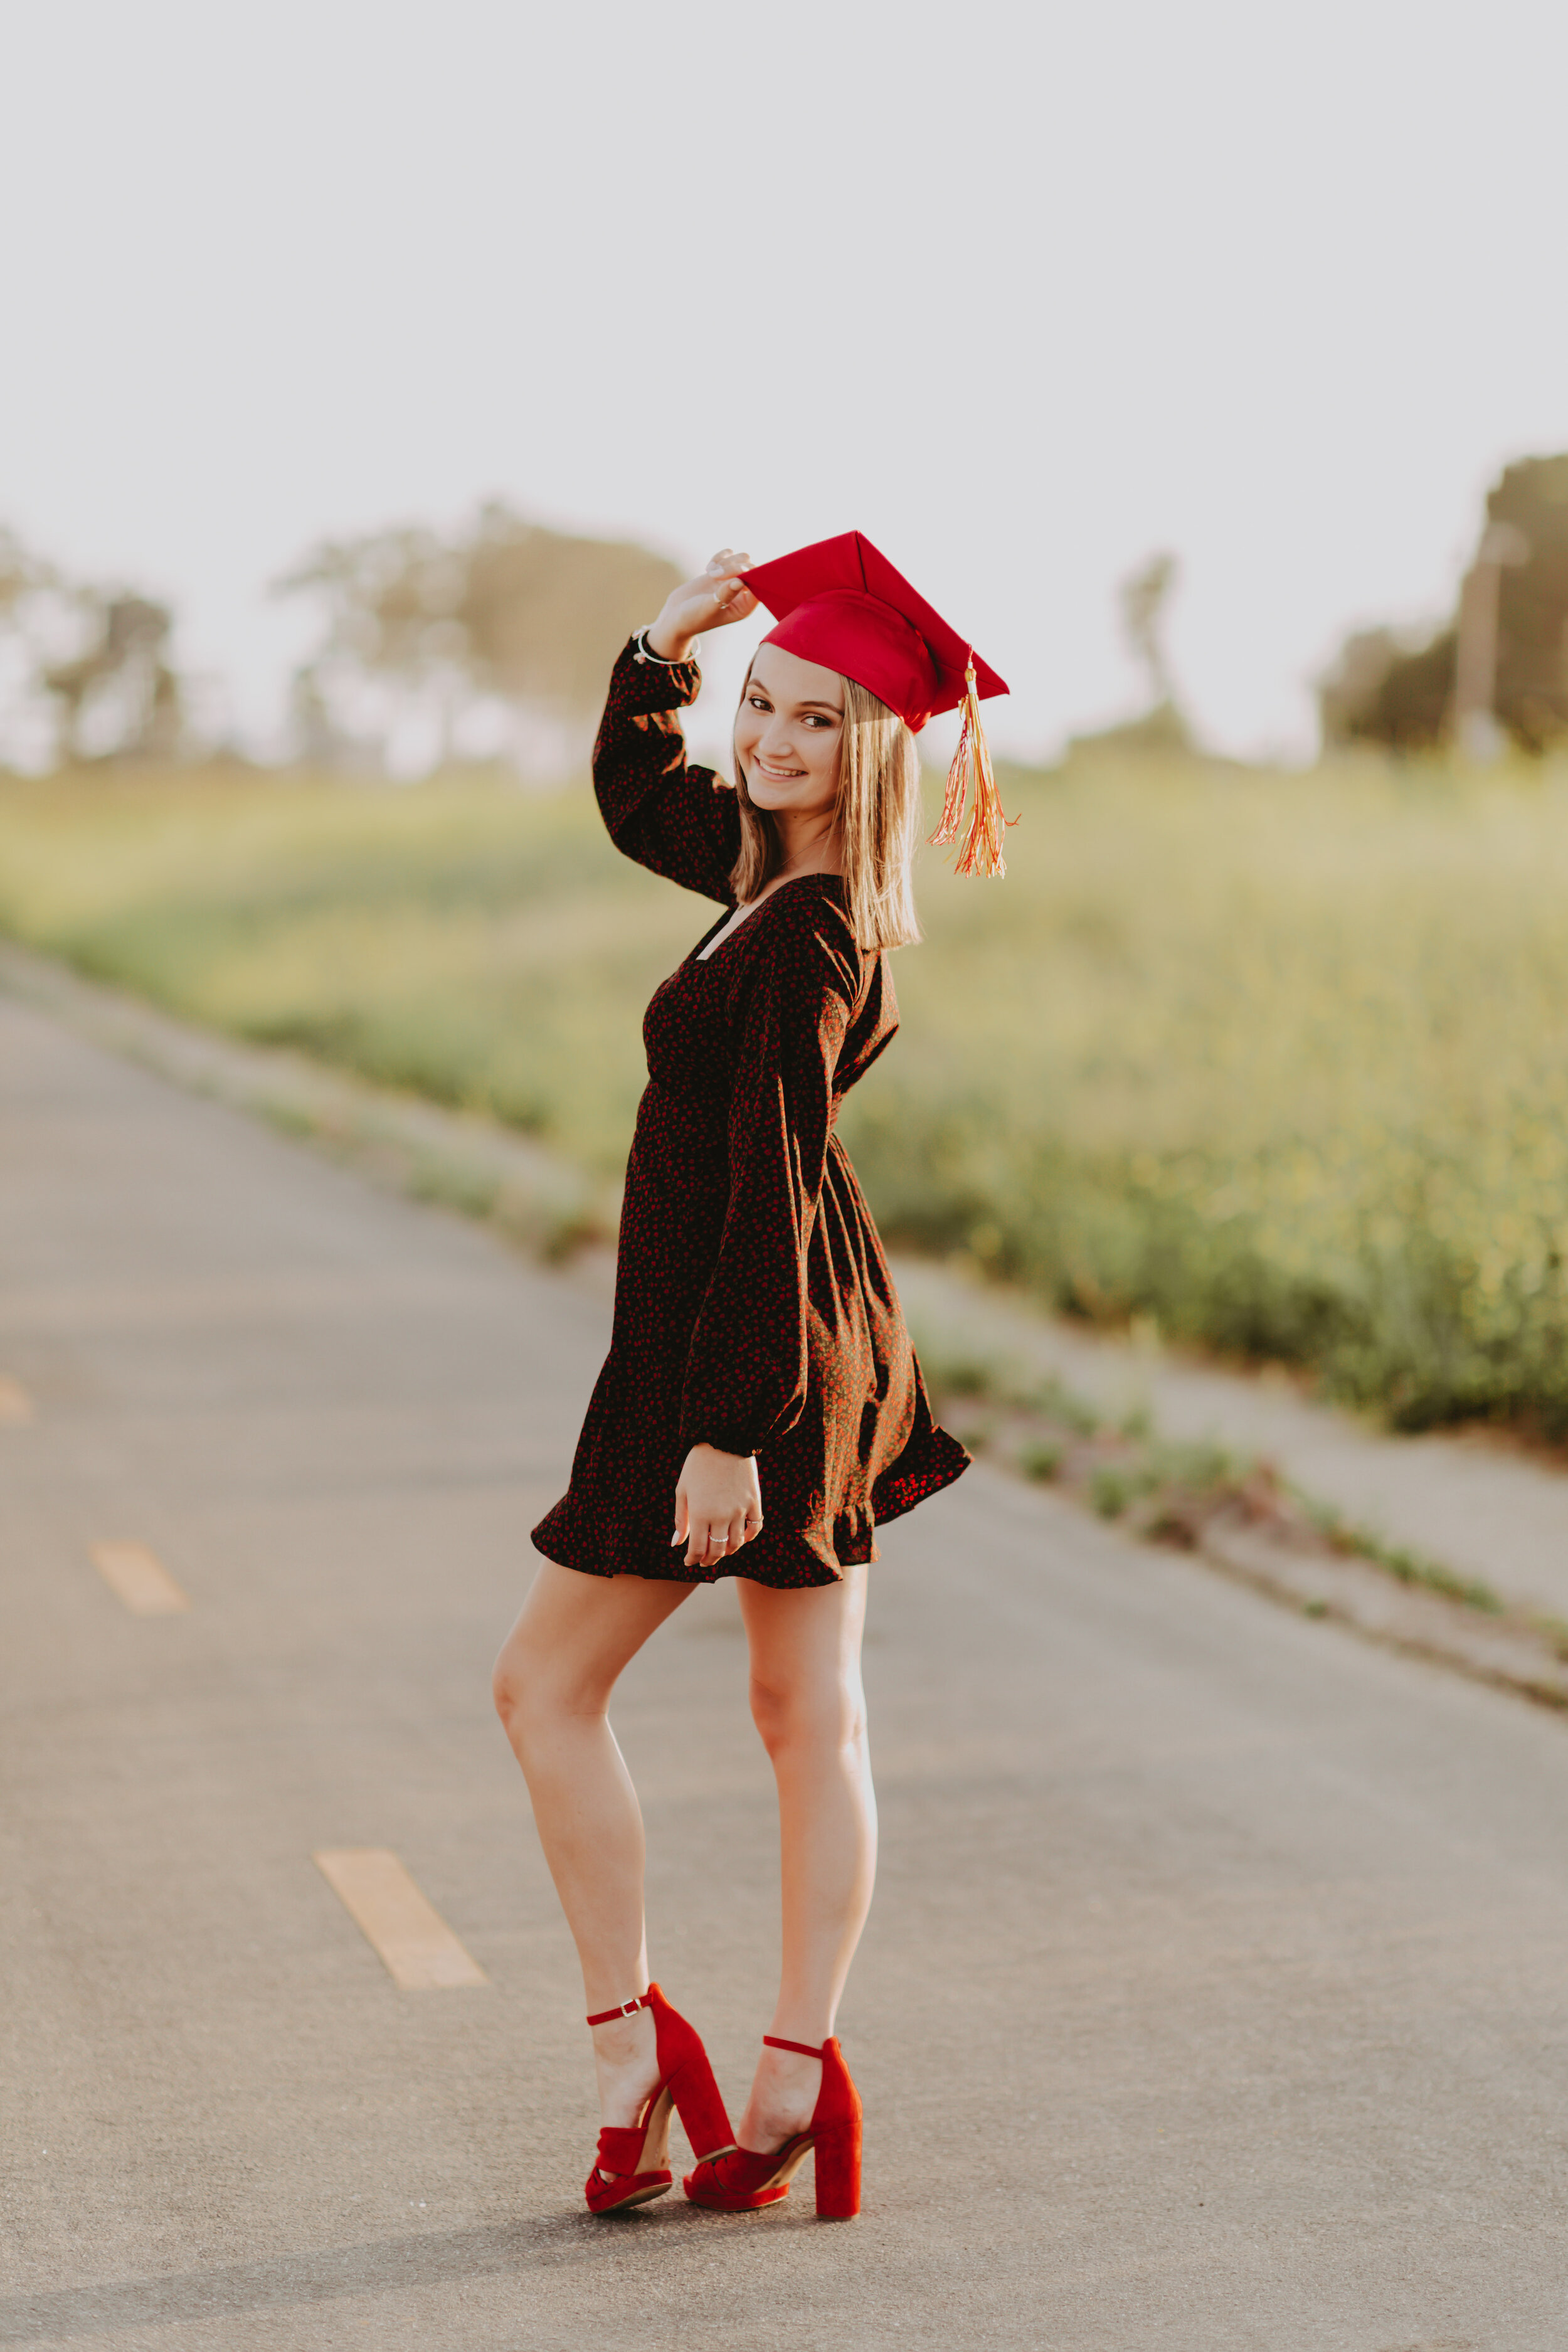 What Should I Wear To My Senior Photo Shoot? 5 Game-Changing Tips